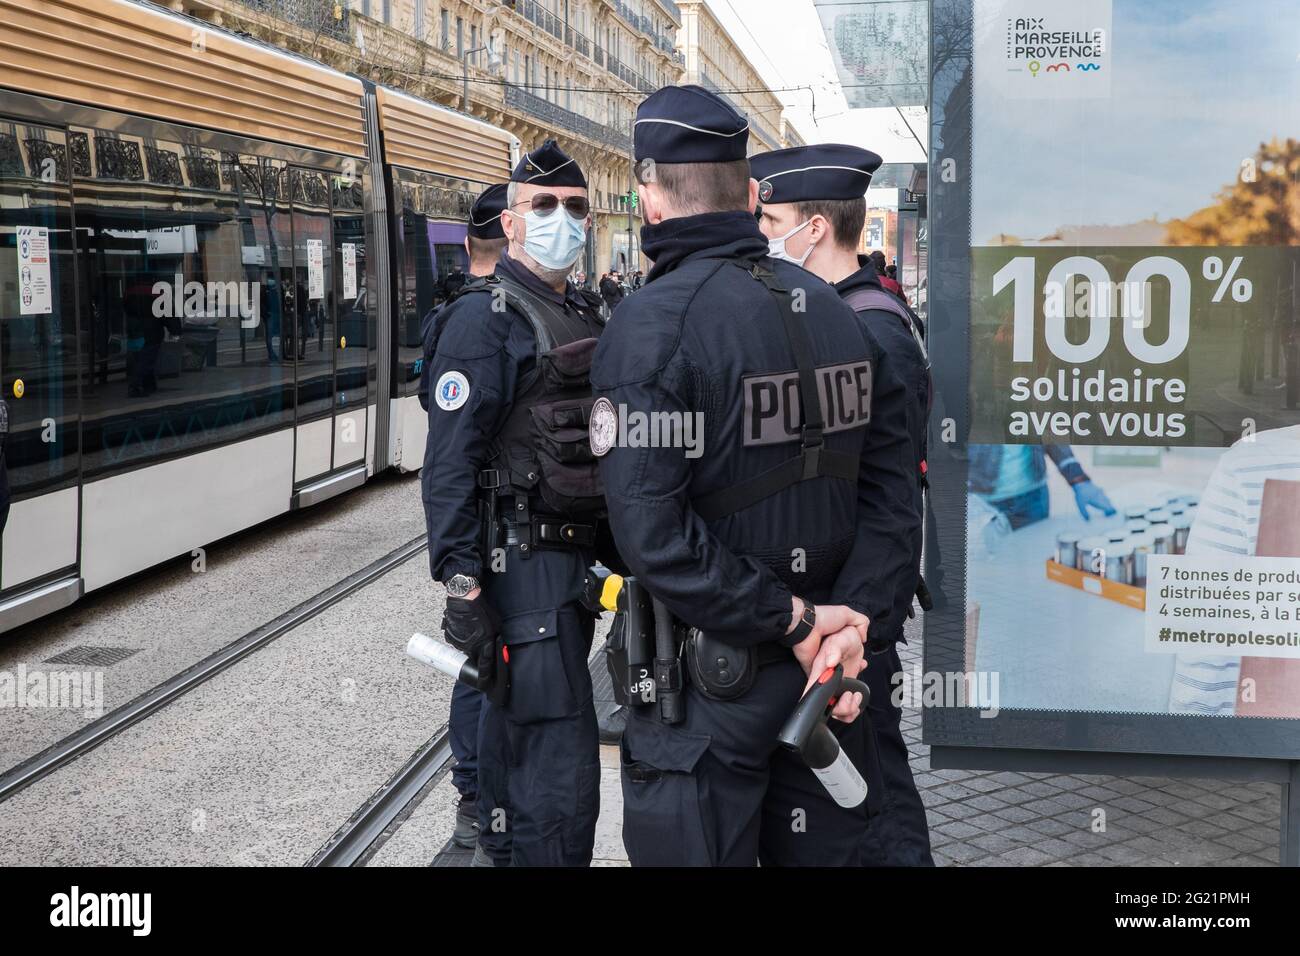 Marseille, France. 09th Feb, 2021. Police officers in their uniforms seen  in action during law enforcement and security operations in Marseille.Since  the beginning of 2021, the Prefecture of Police has reinforced the